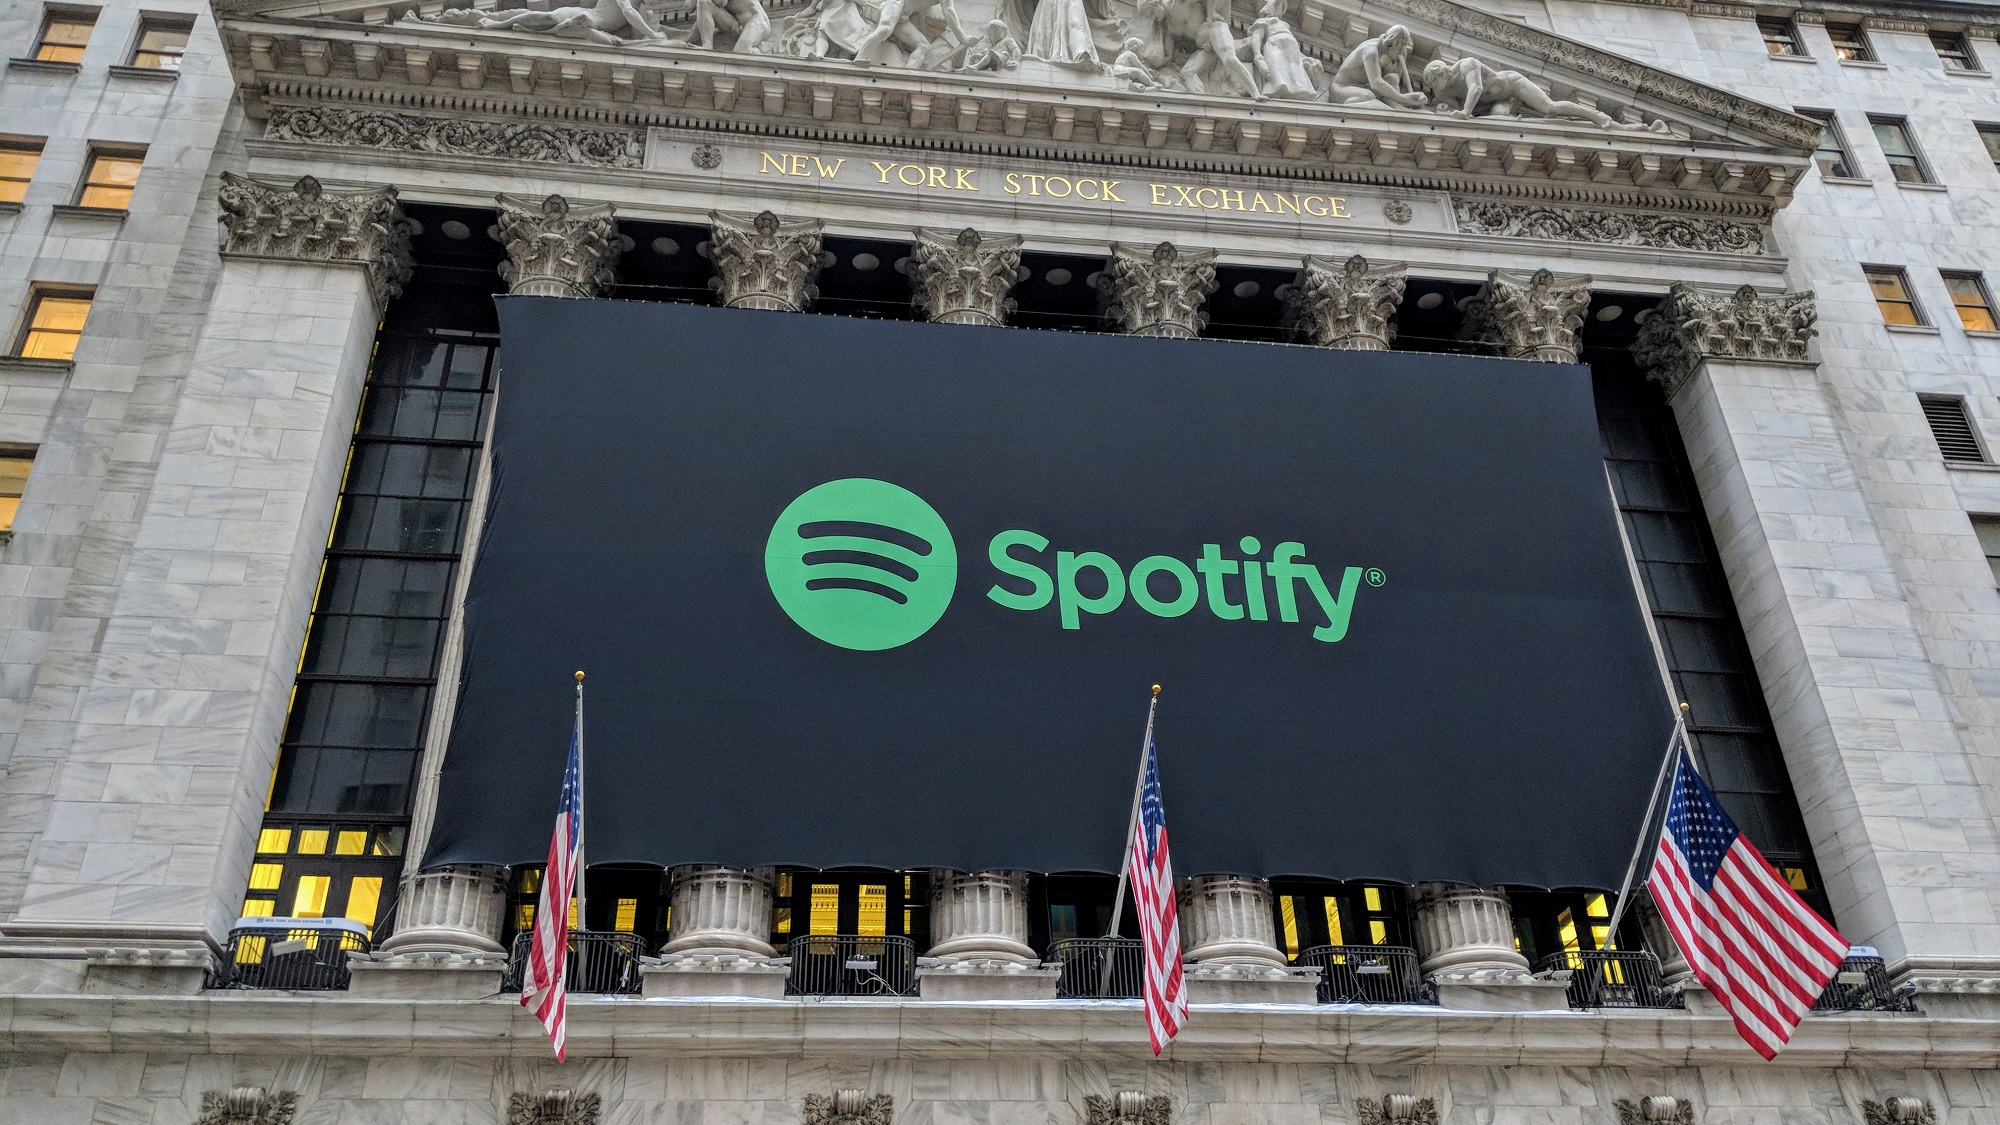 Spotify banner at the New York Stock Exchange.